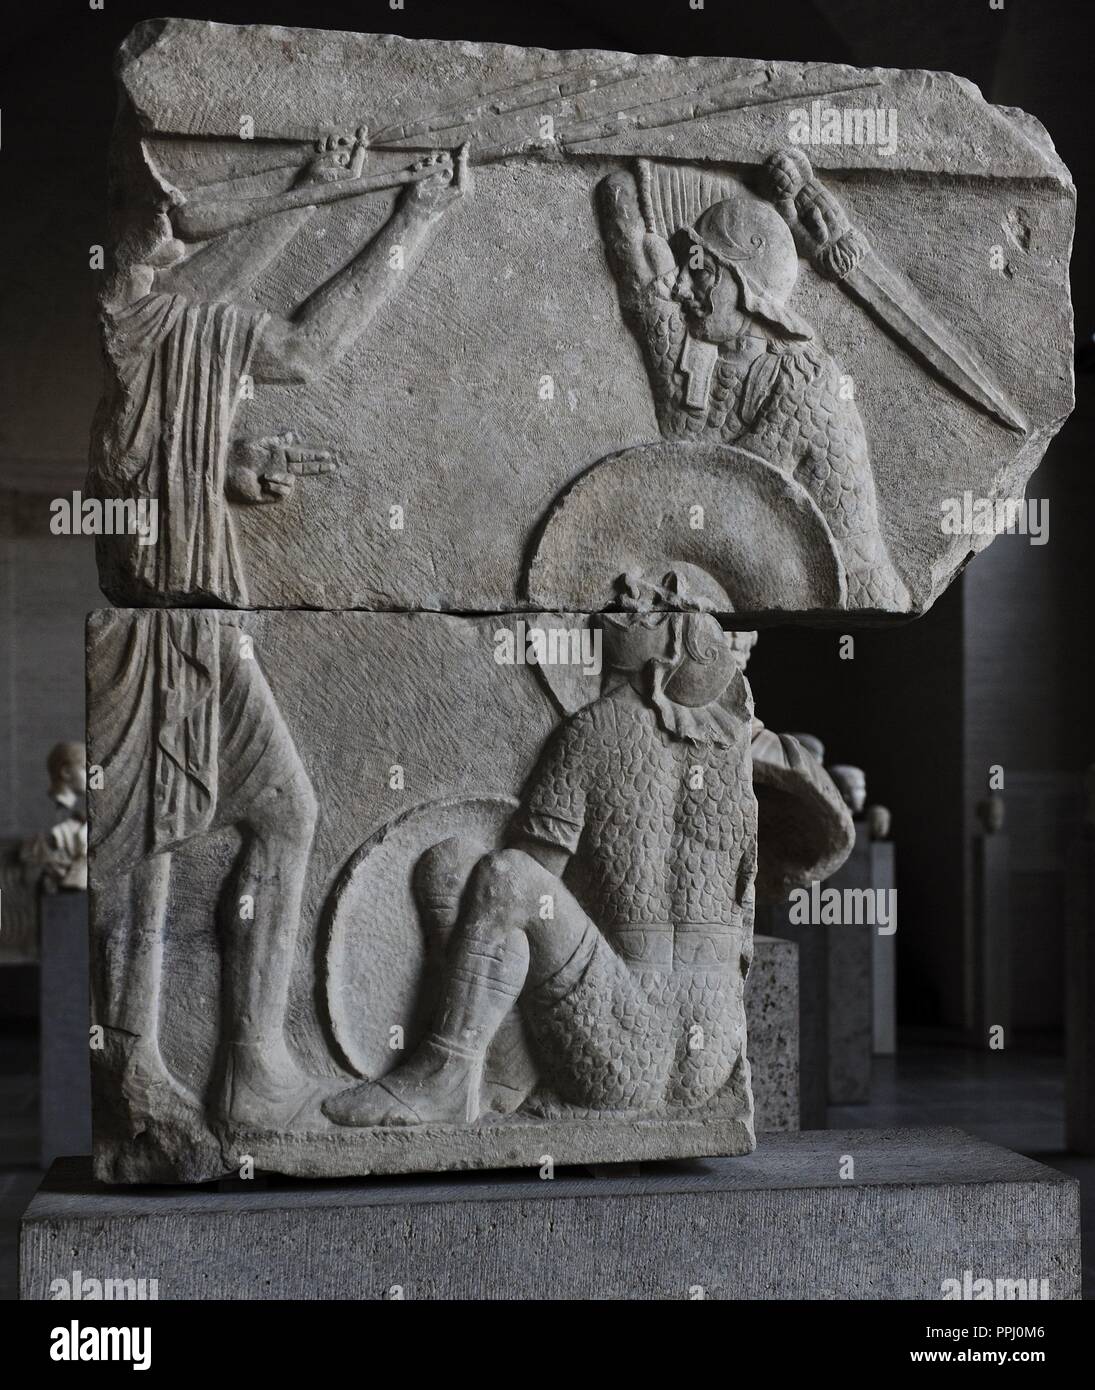 Relief of gladiators. About 30 BC. The slab probably belongs to a grave memorial and recalls the extravagant gladiator fights sponsored by the deceased. Glyptothek. Munich. Germany. Stock Photo